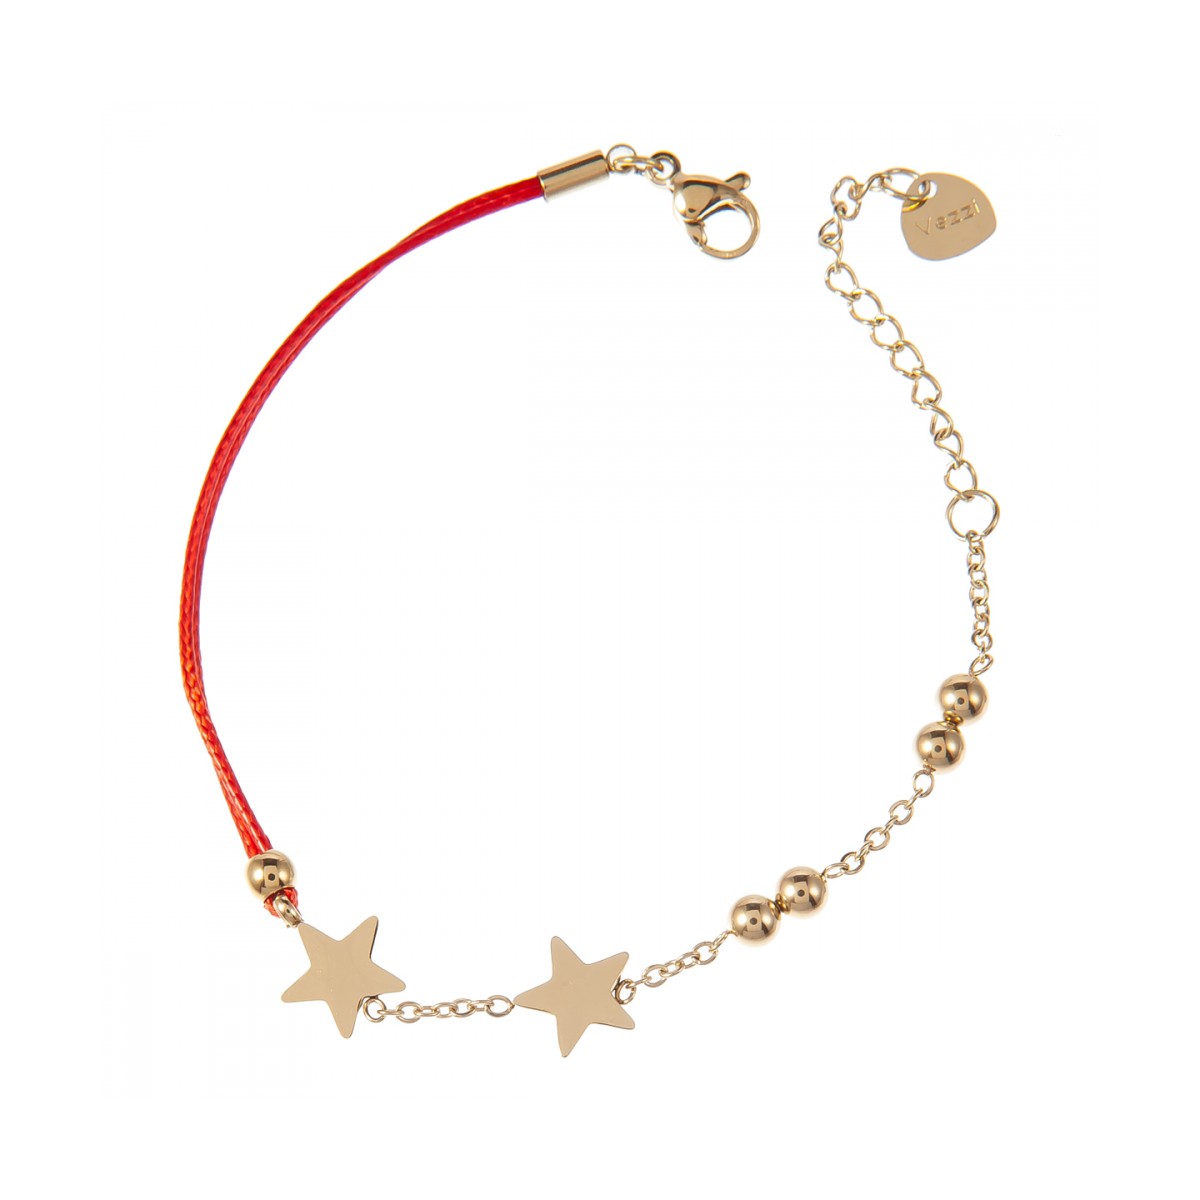 Gold Plated Star or Infinity Chain Bracelet with red thread